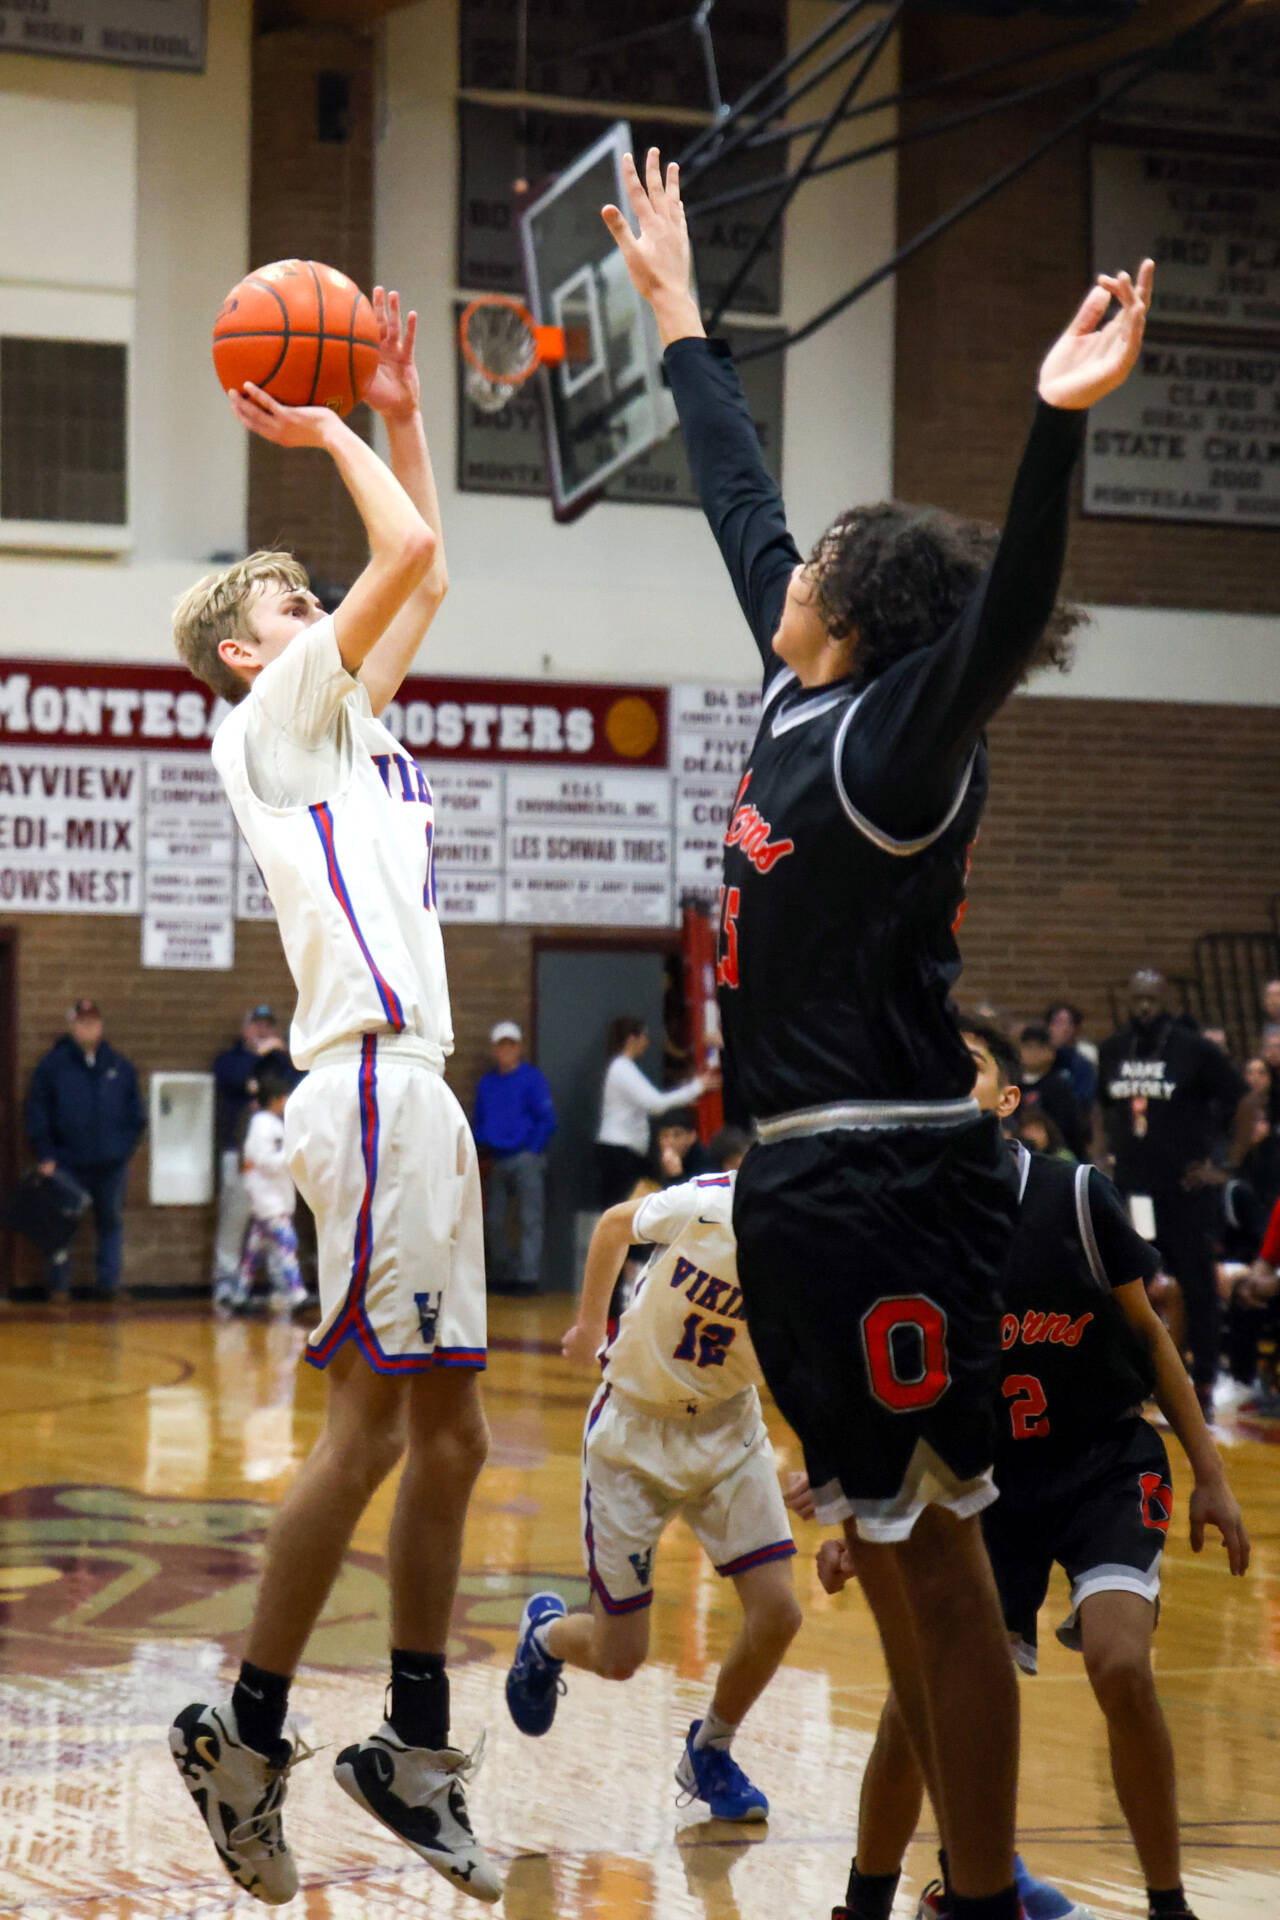 PHOTO BY LARRY BALE Willapa Valley senior Riley Pearson, left, puts up a jump shot during the Vikings’ 62-54 win over Oakville in the 1B District 4 Championship on Saturday at Montesano High School.